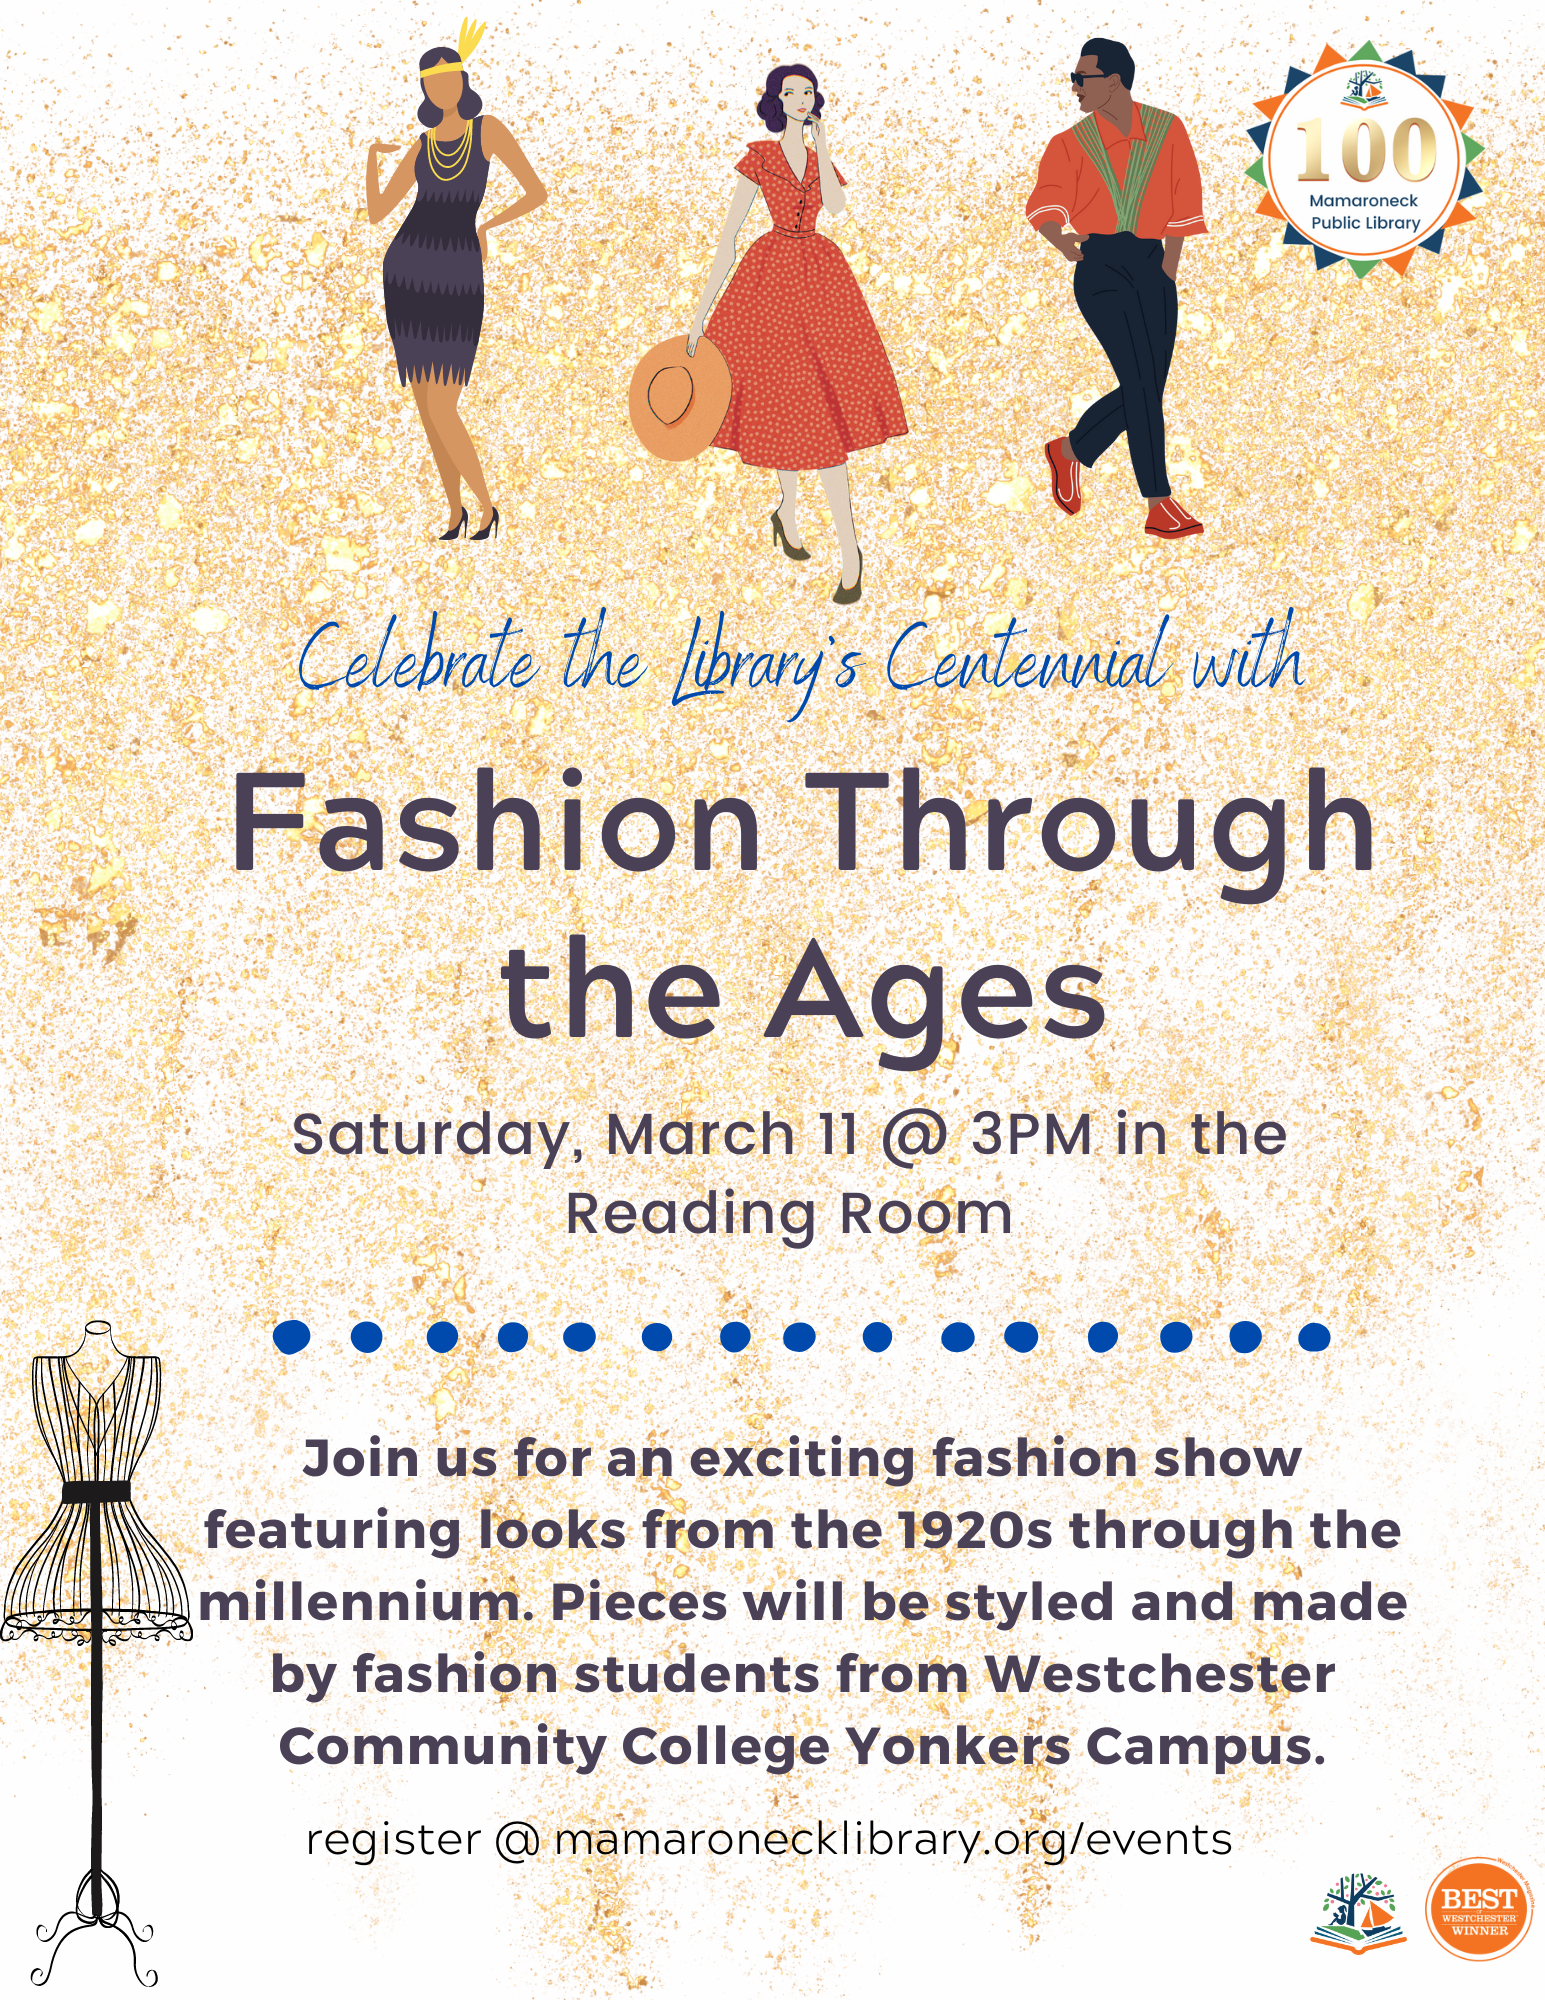 3/11 @ 3pm in the Reading Room: Fashion show